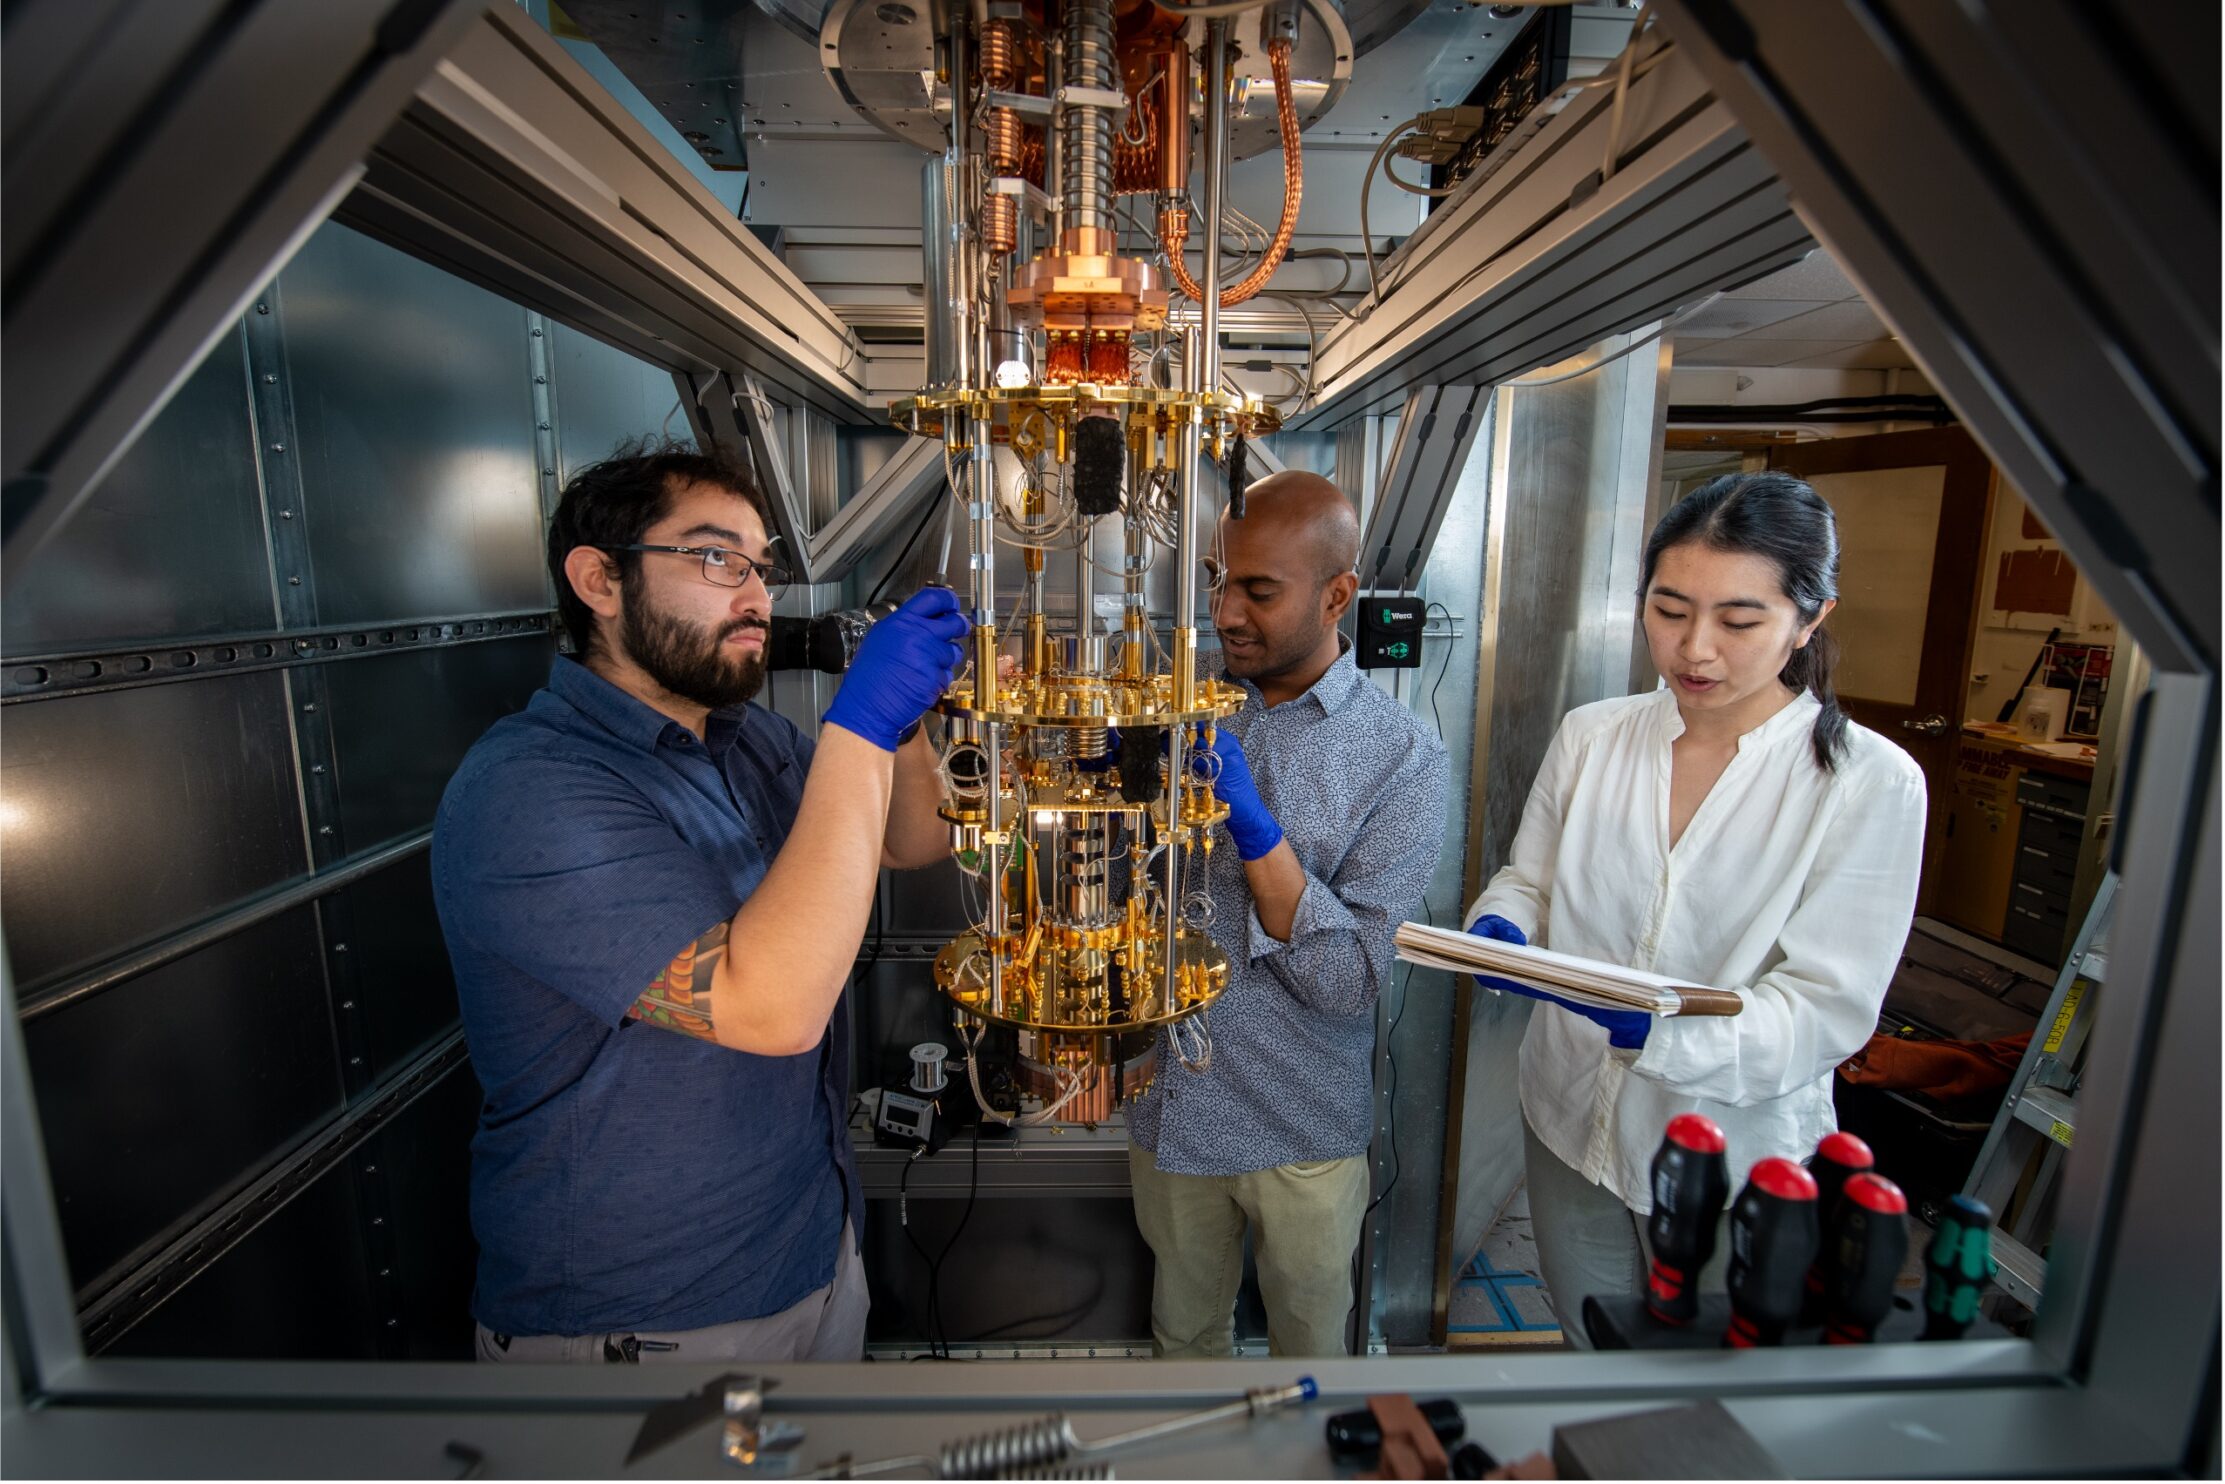 Michael Williams (left), Graduate Student Research Associate, Physics Division, Vetri Velan, Postdoctoral Researcher, Physics Division, and Yue Wang, Graduate Student Research Associate, Physics Division, work on HeRALD, a Helium Rotor Apparatus utilized as a detector for Light Dark Matter, at the Xenon Lab in Building 50 at Lawrence Berkeley National Laboratory (Berkeley Lab)